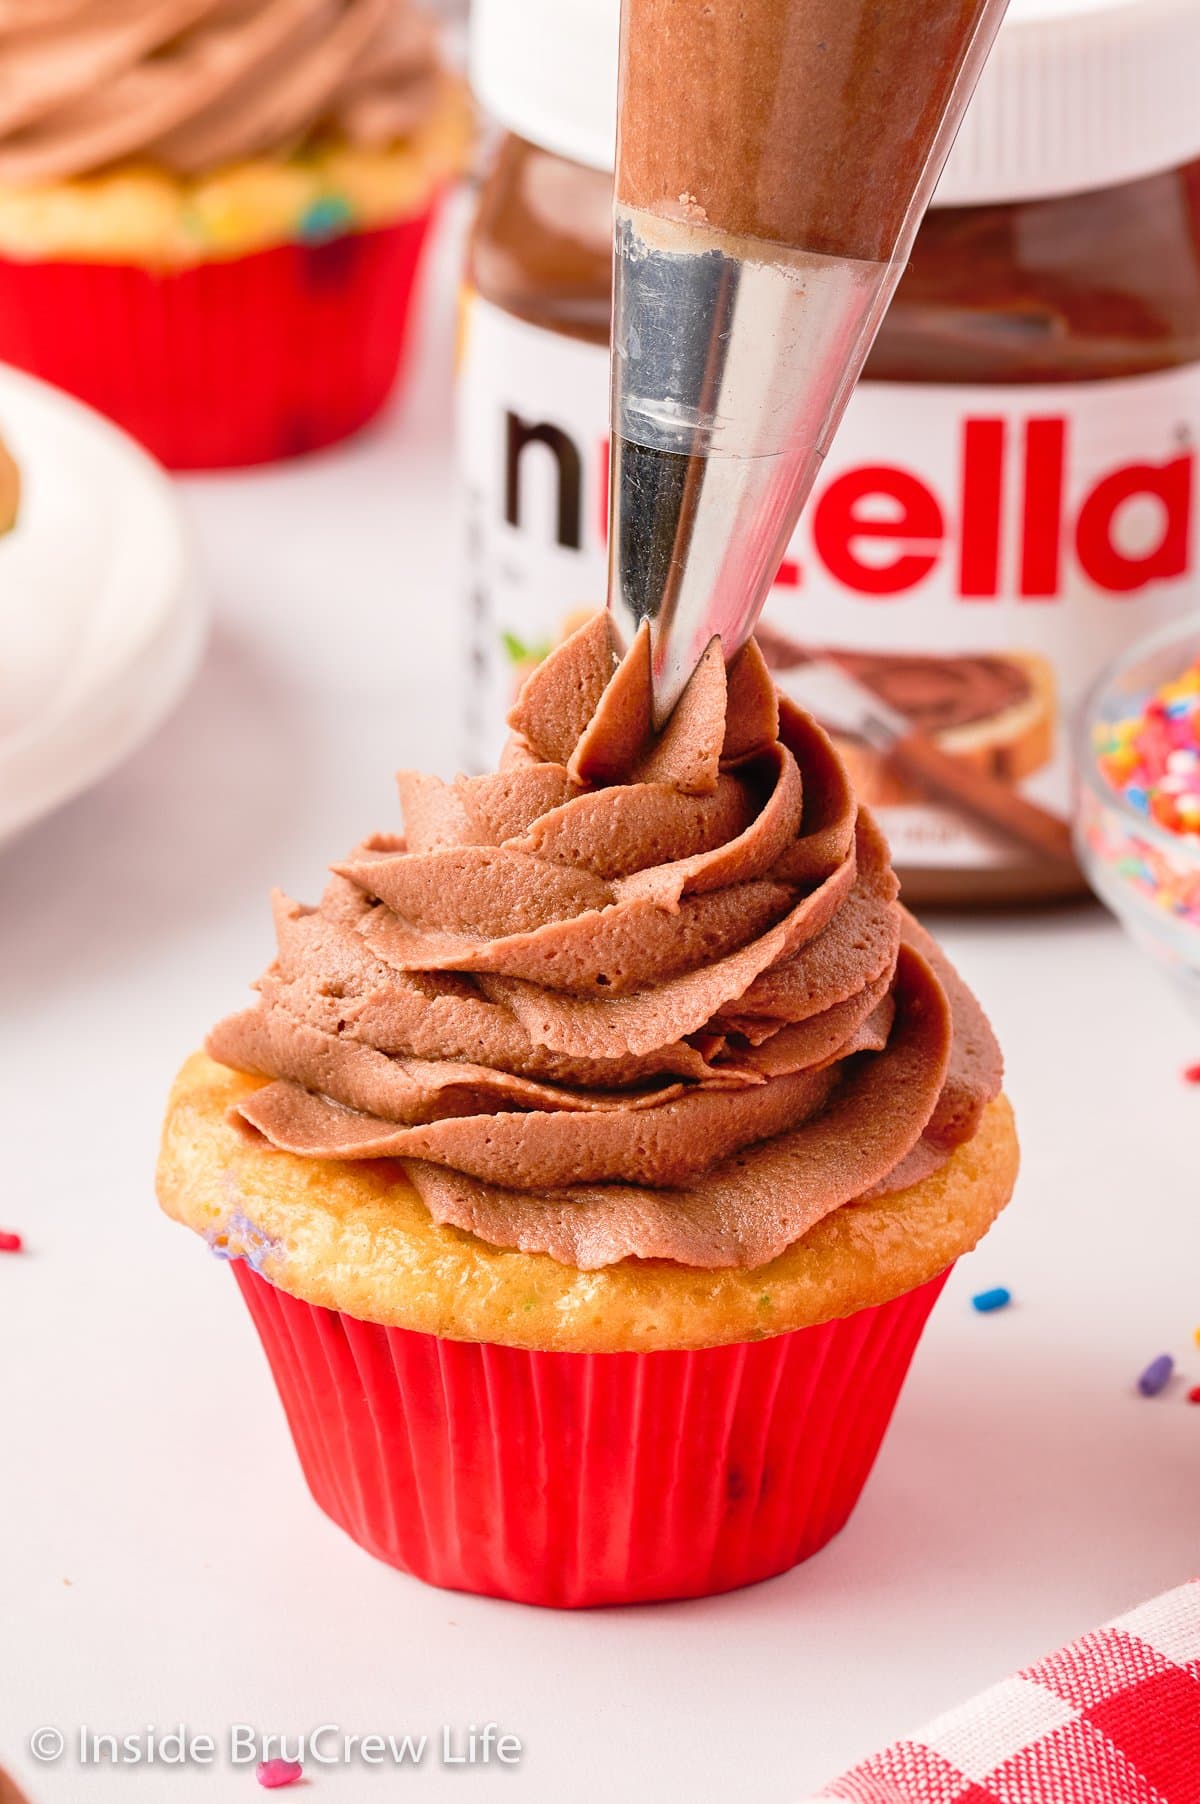 A cupcake being topped with a swirl of chocolate frosting.